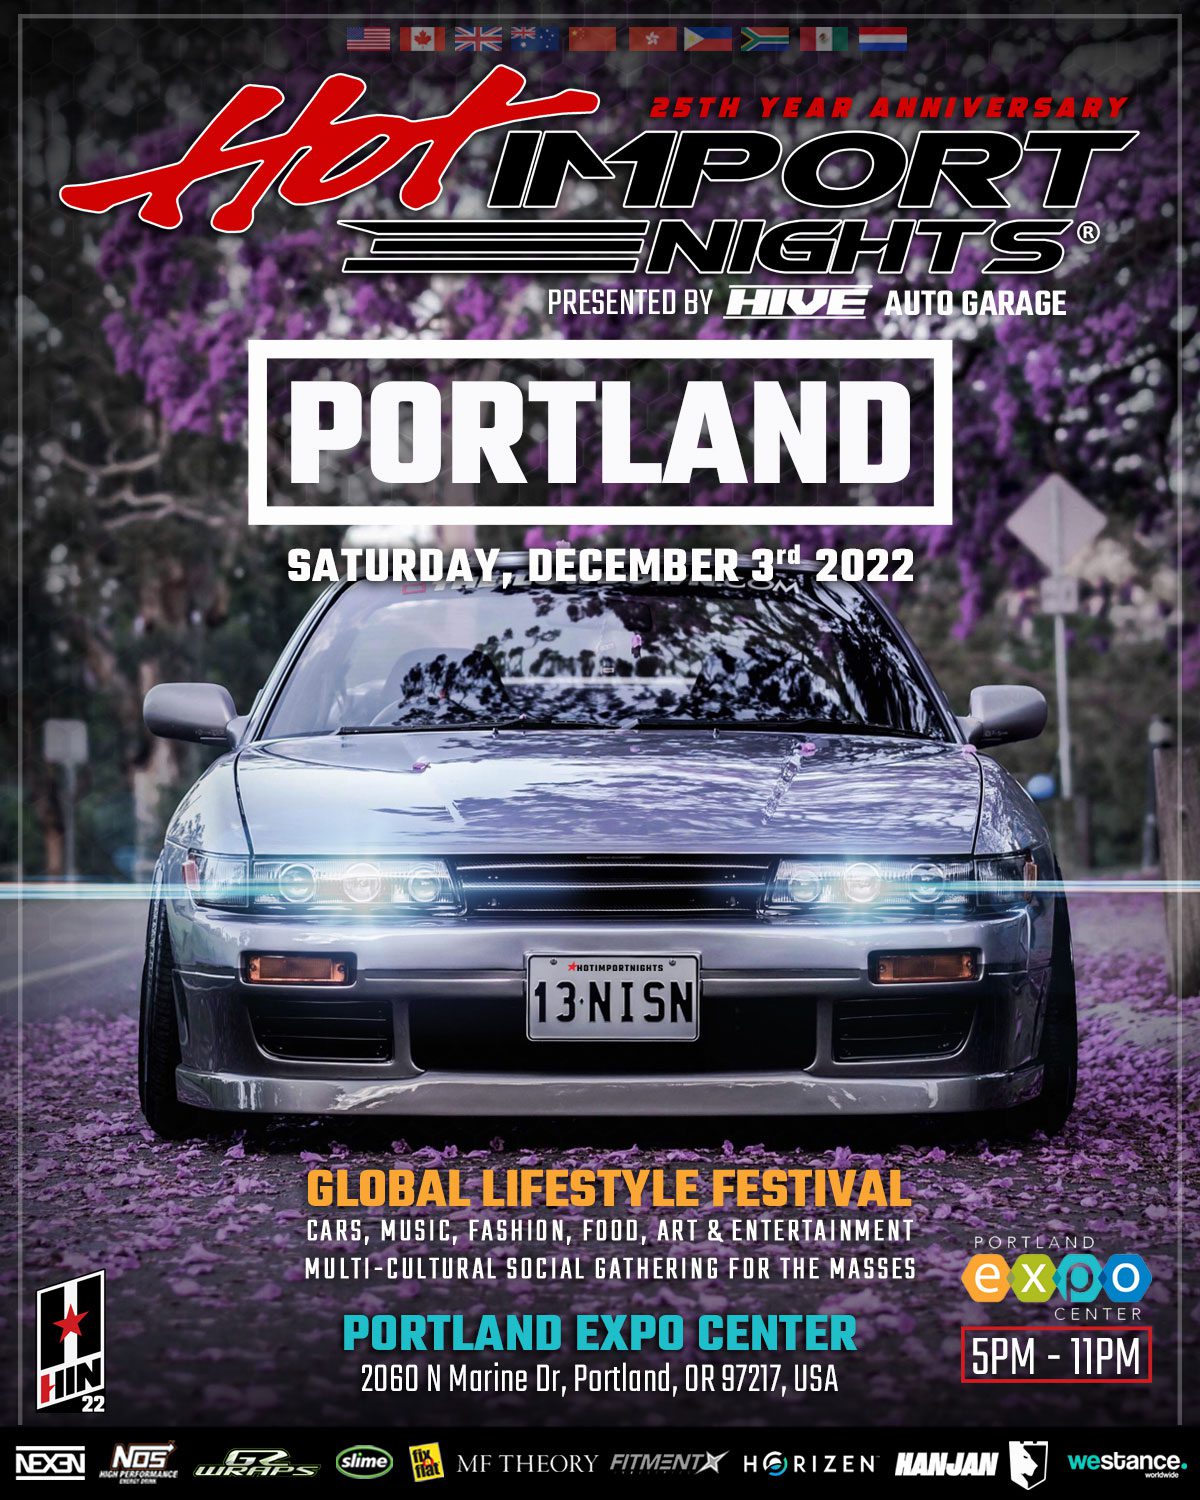 Hot Import Nights cars, models, music and lifestyle events